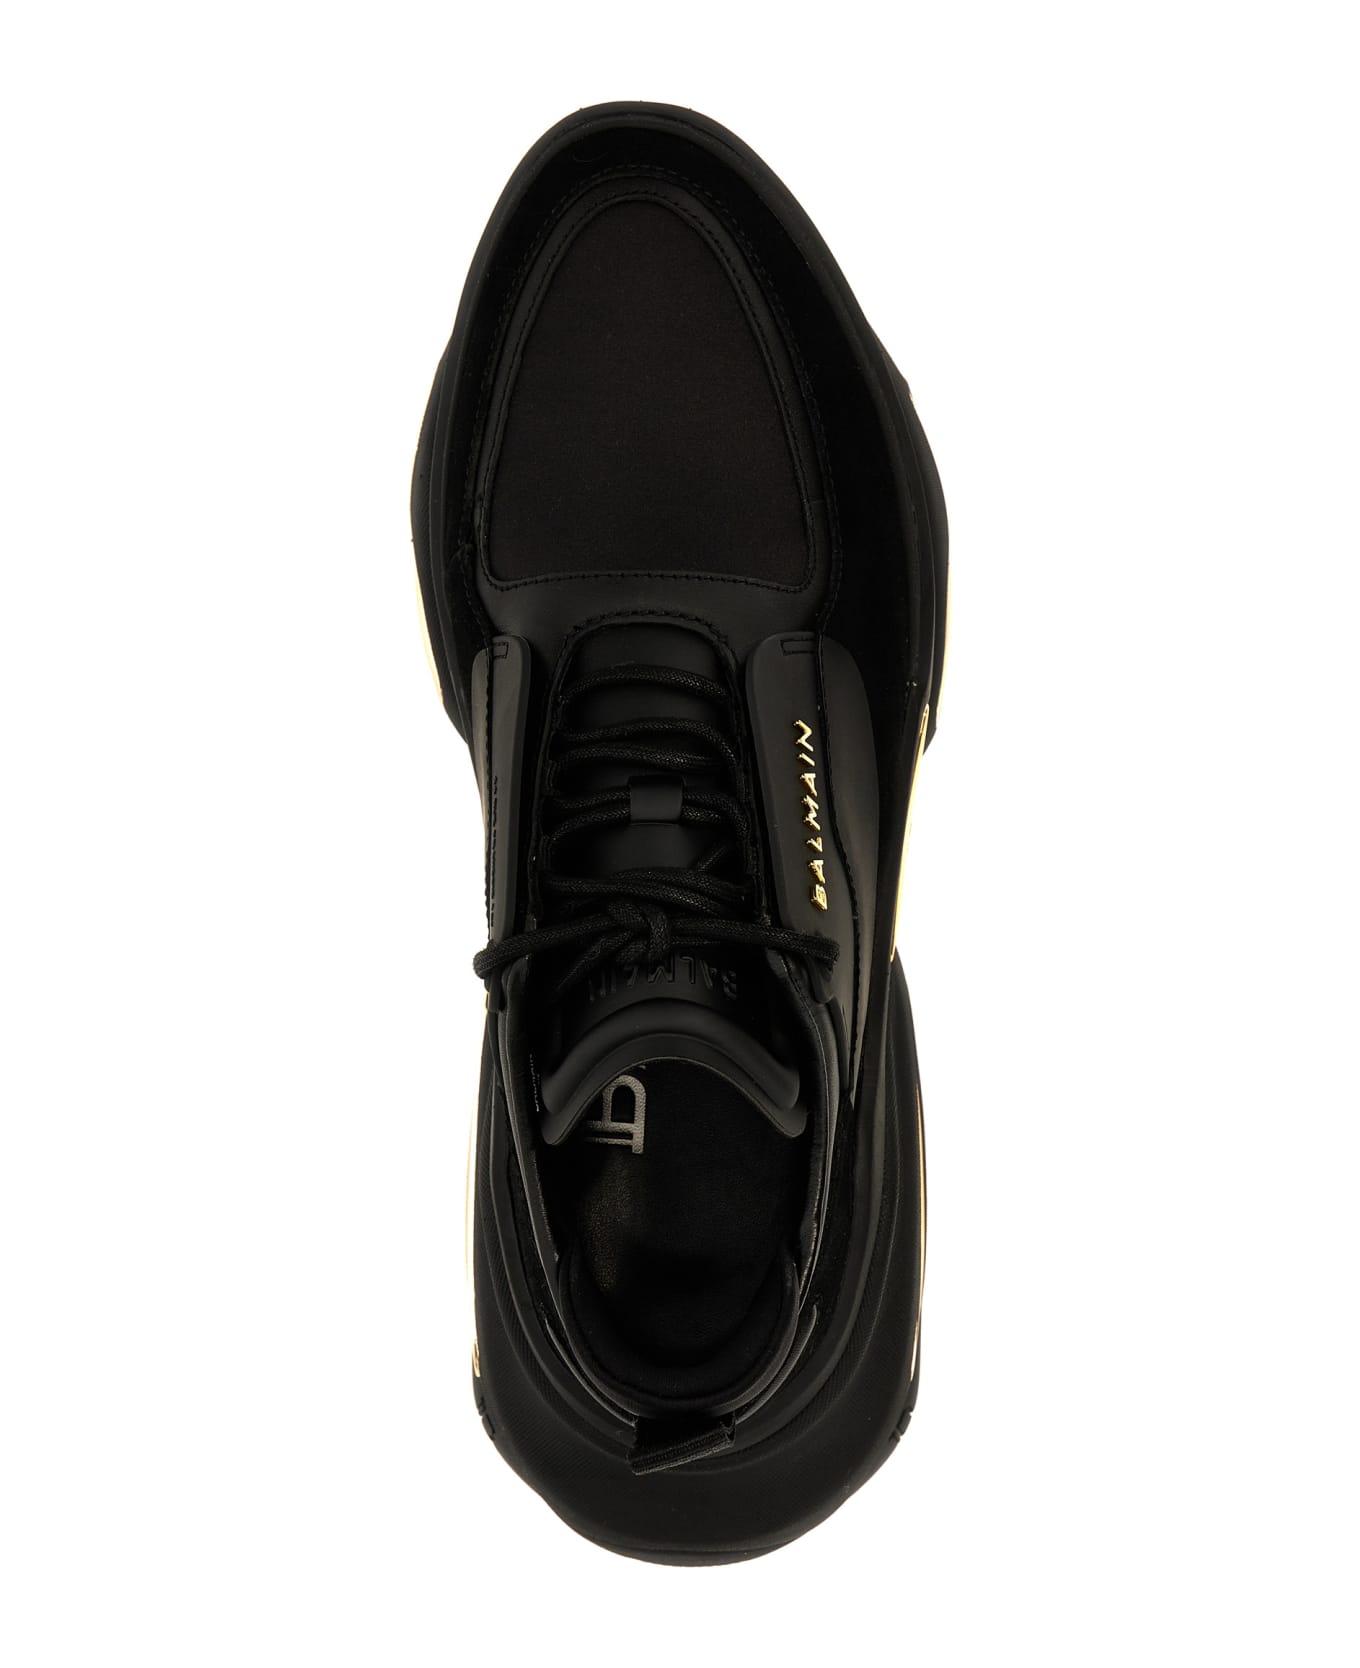 Balmain B-bold Low-top Leather And Suede Sneakers - Black